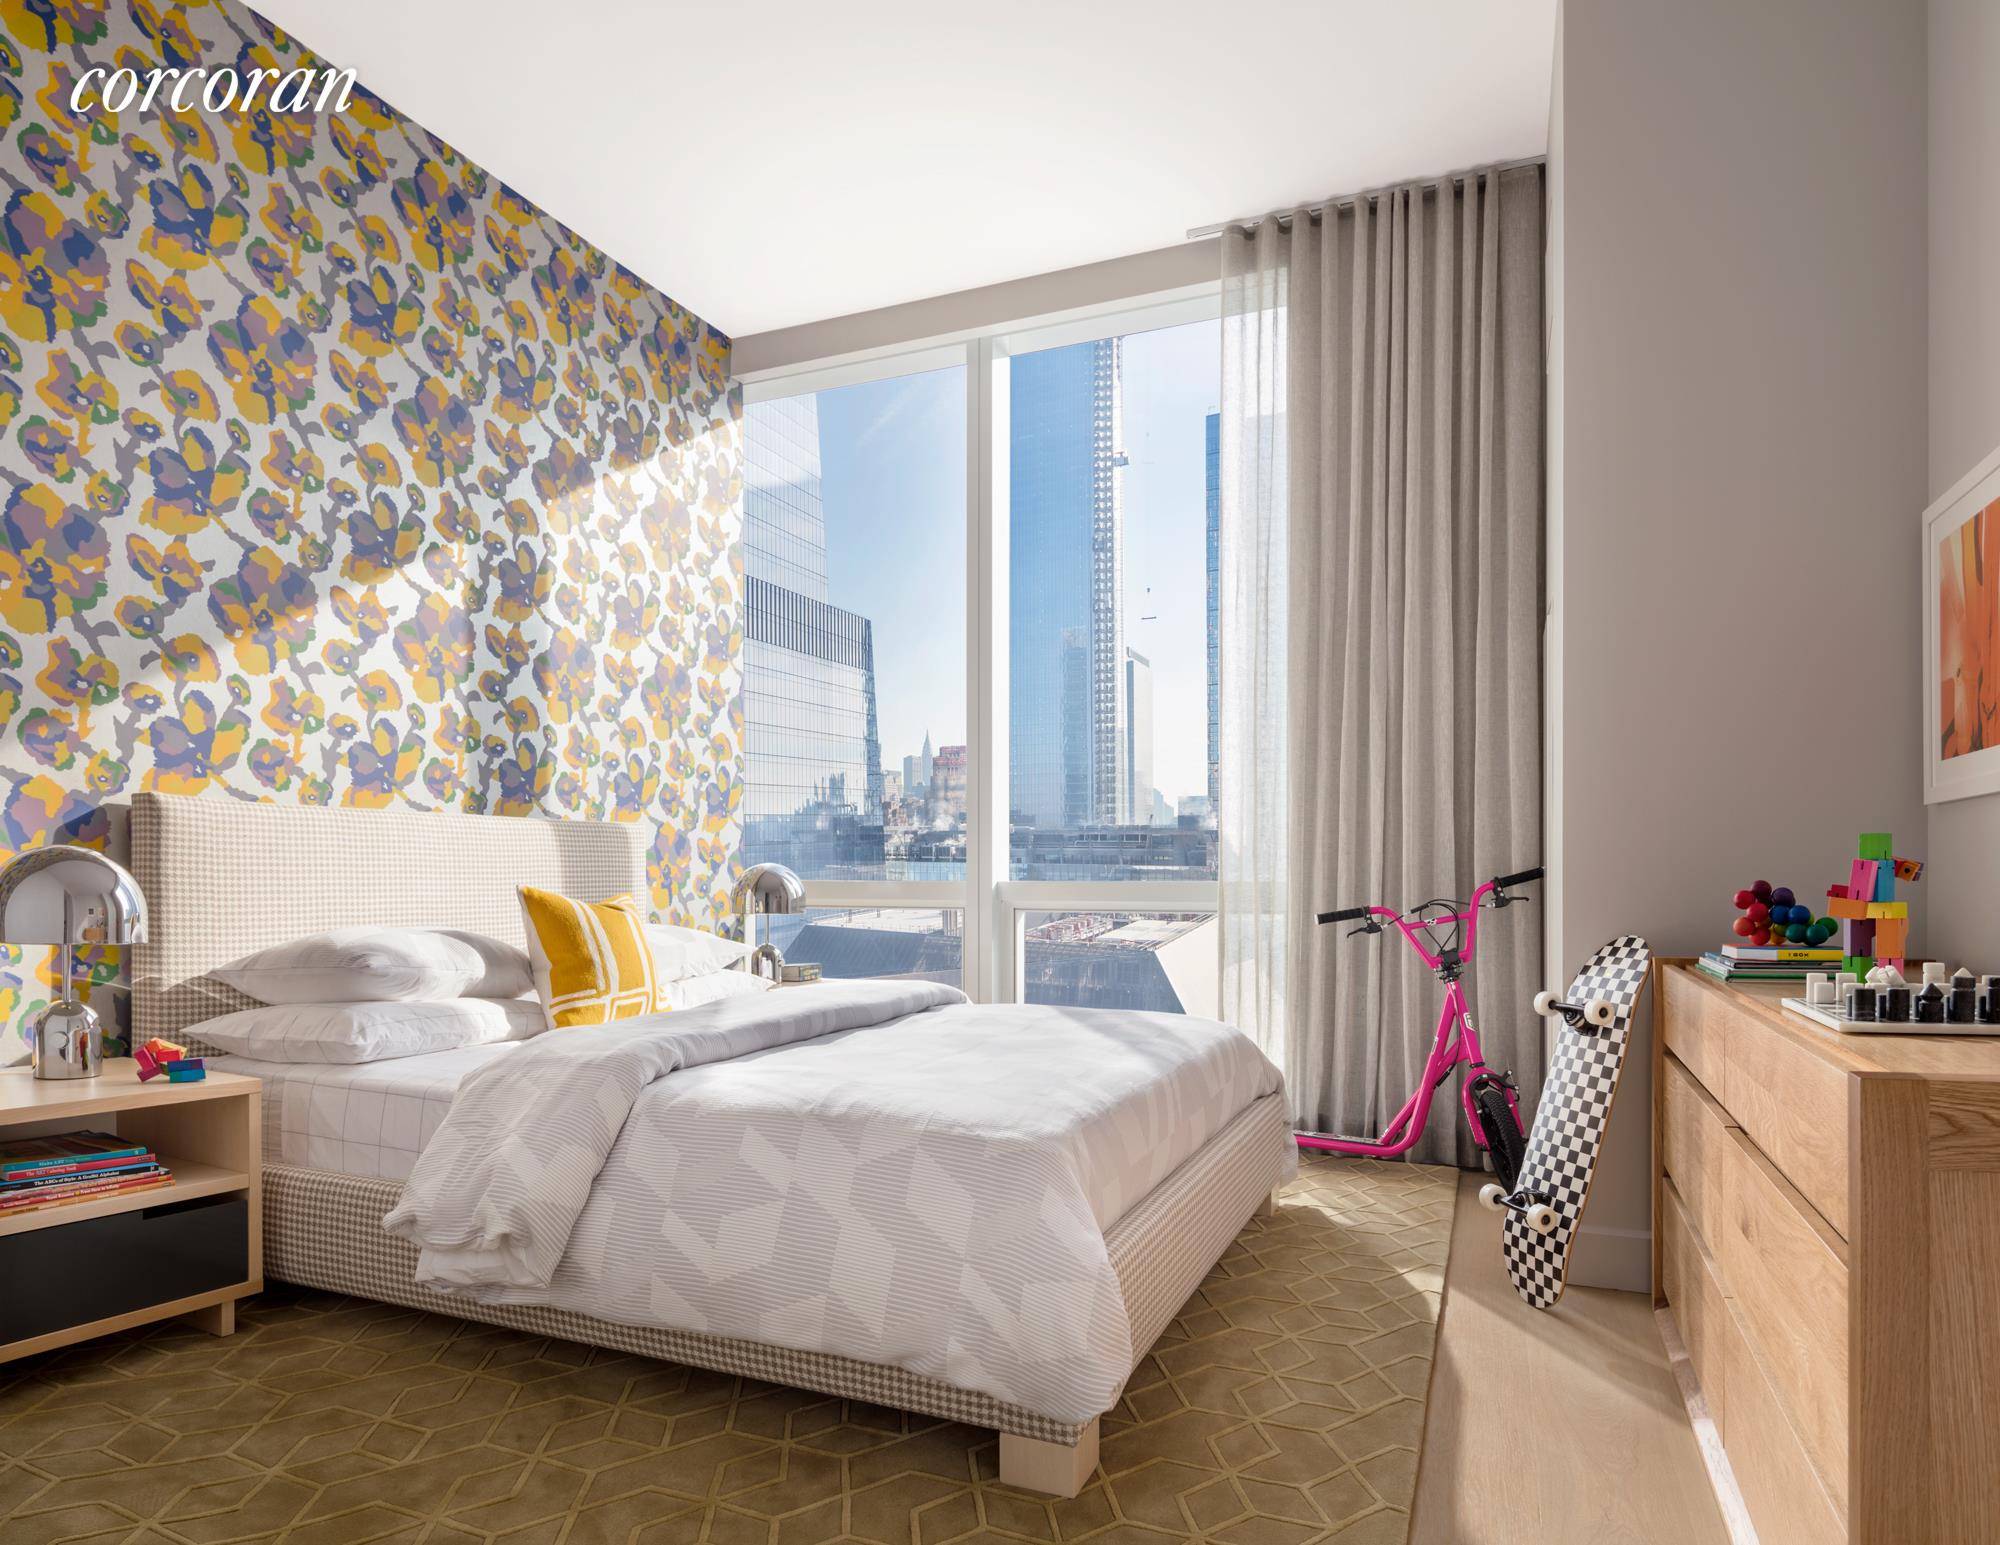 A DISTINGUISHED ADDRESS. Fifteen Hudson Yards occupies a prime position on the Public Square and Gardens at the center of Hudson Yards, directly on the High Line and adjacent to ...